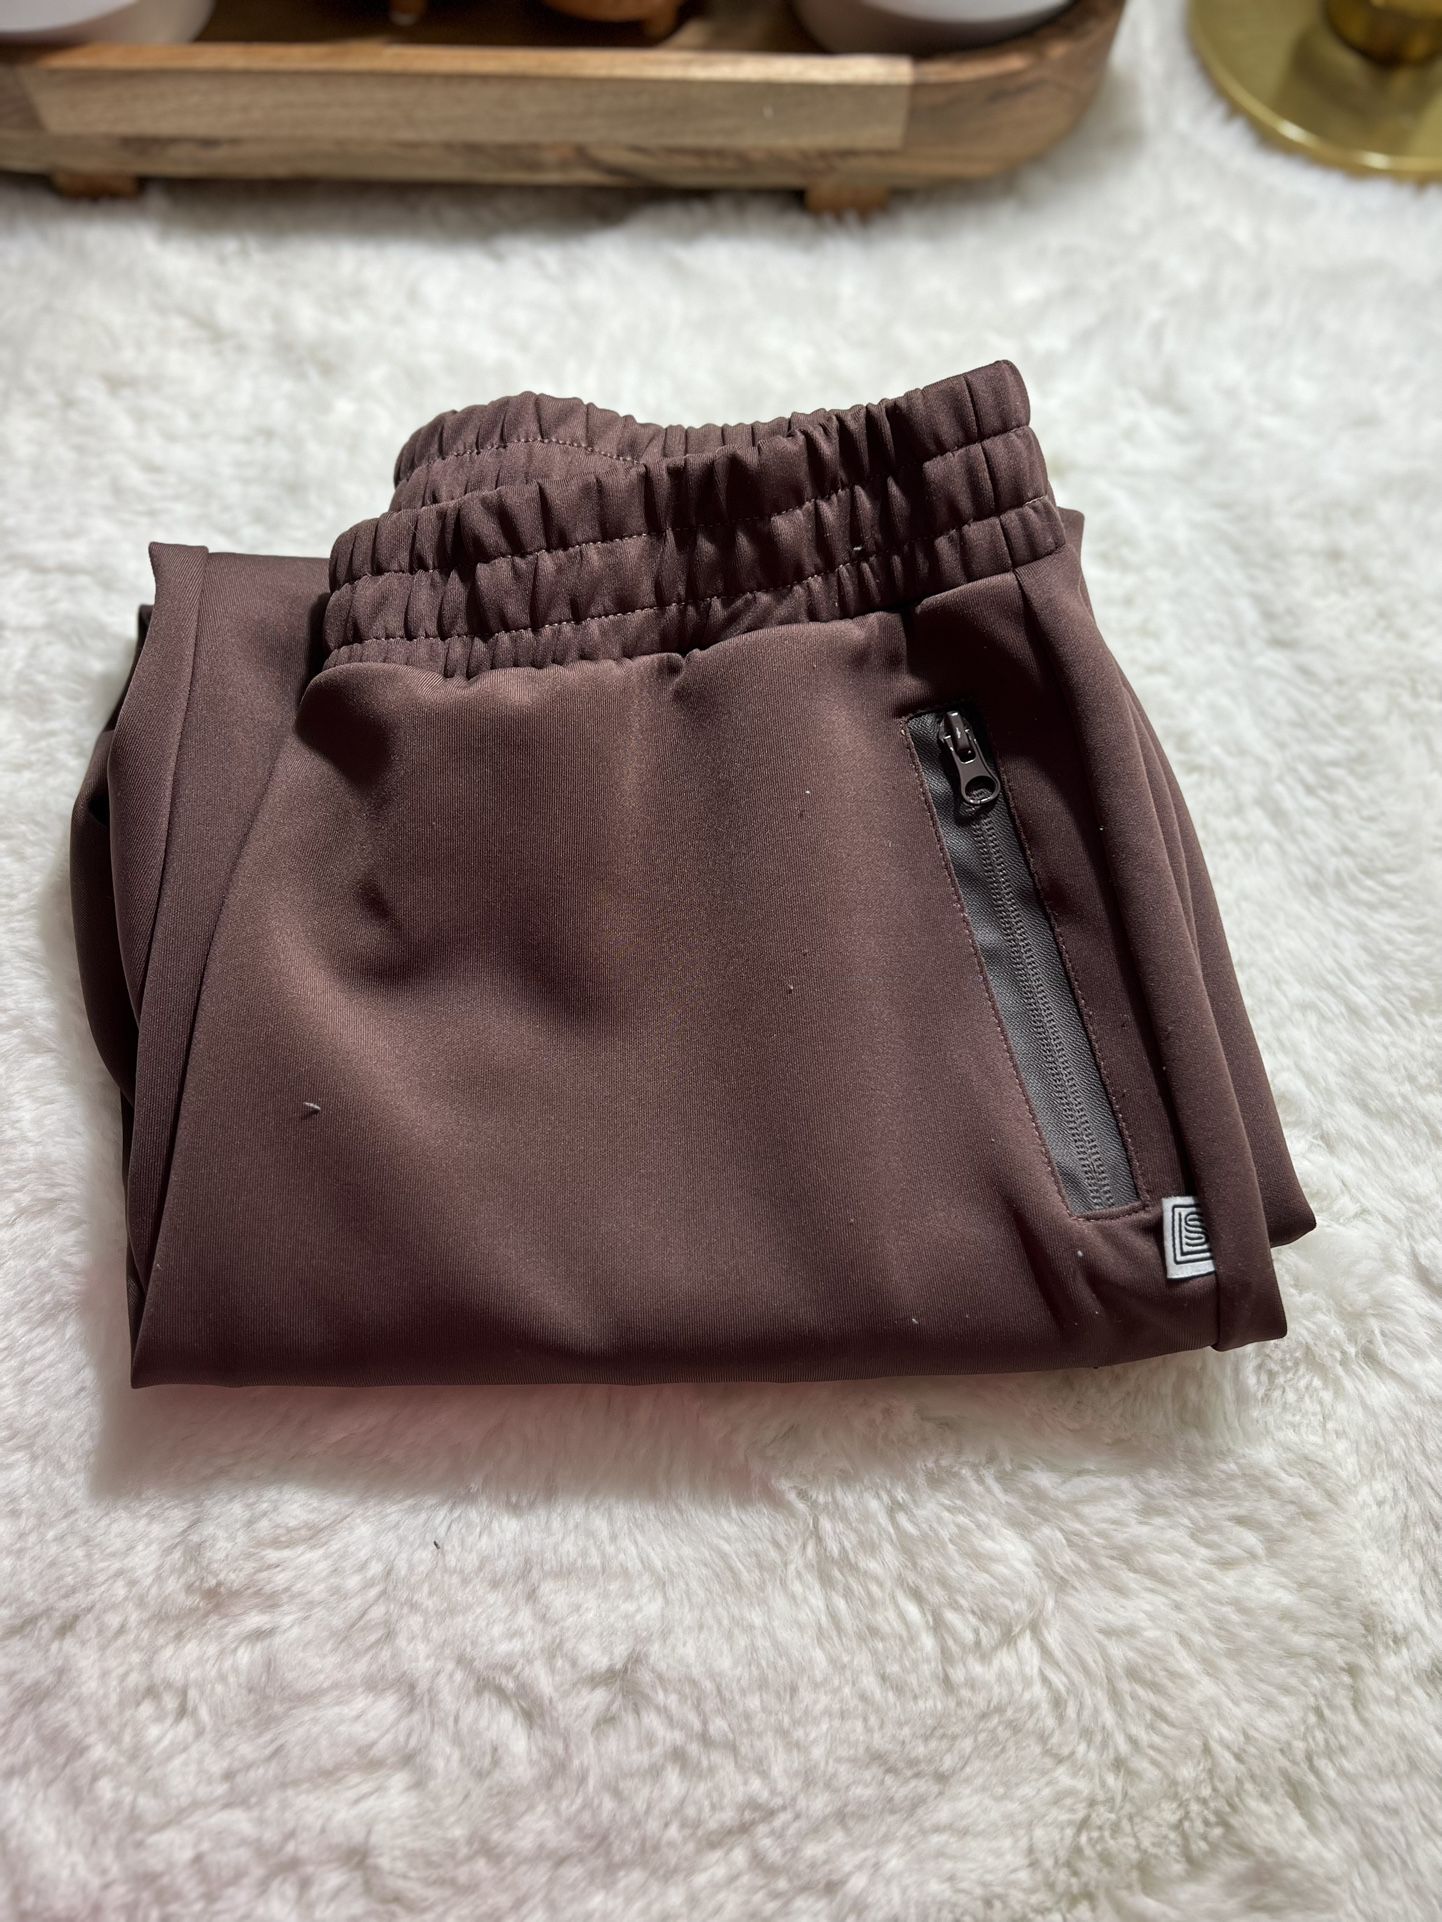 Laundry by Shelli Segal Jogger Pants - Sz XL - Dark Mauve Brown for Sale in  Aurora, CO - OfferUp